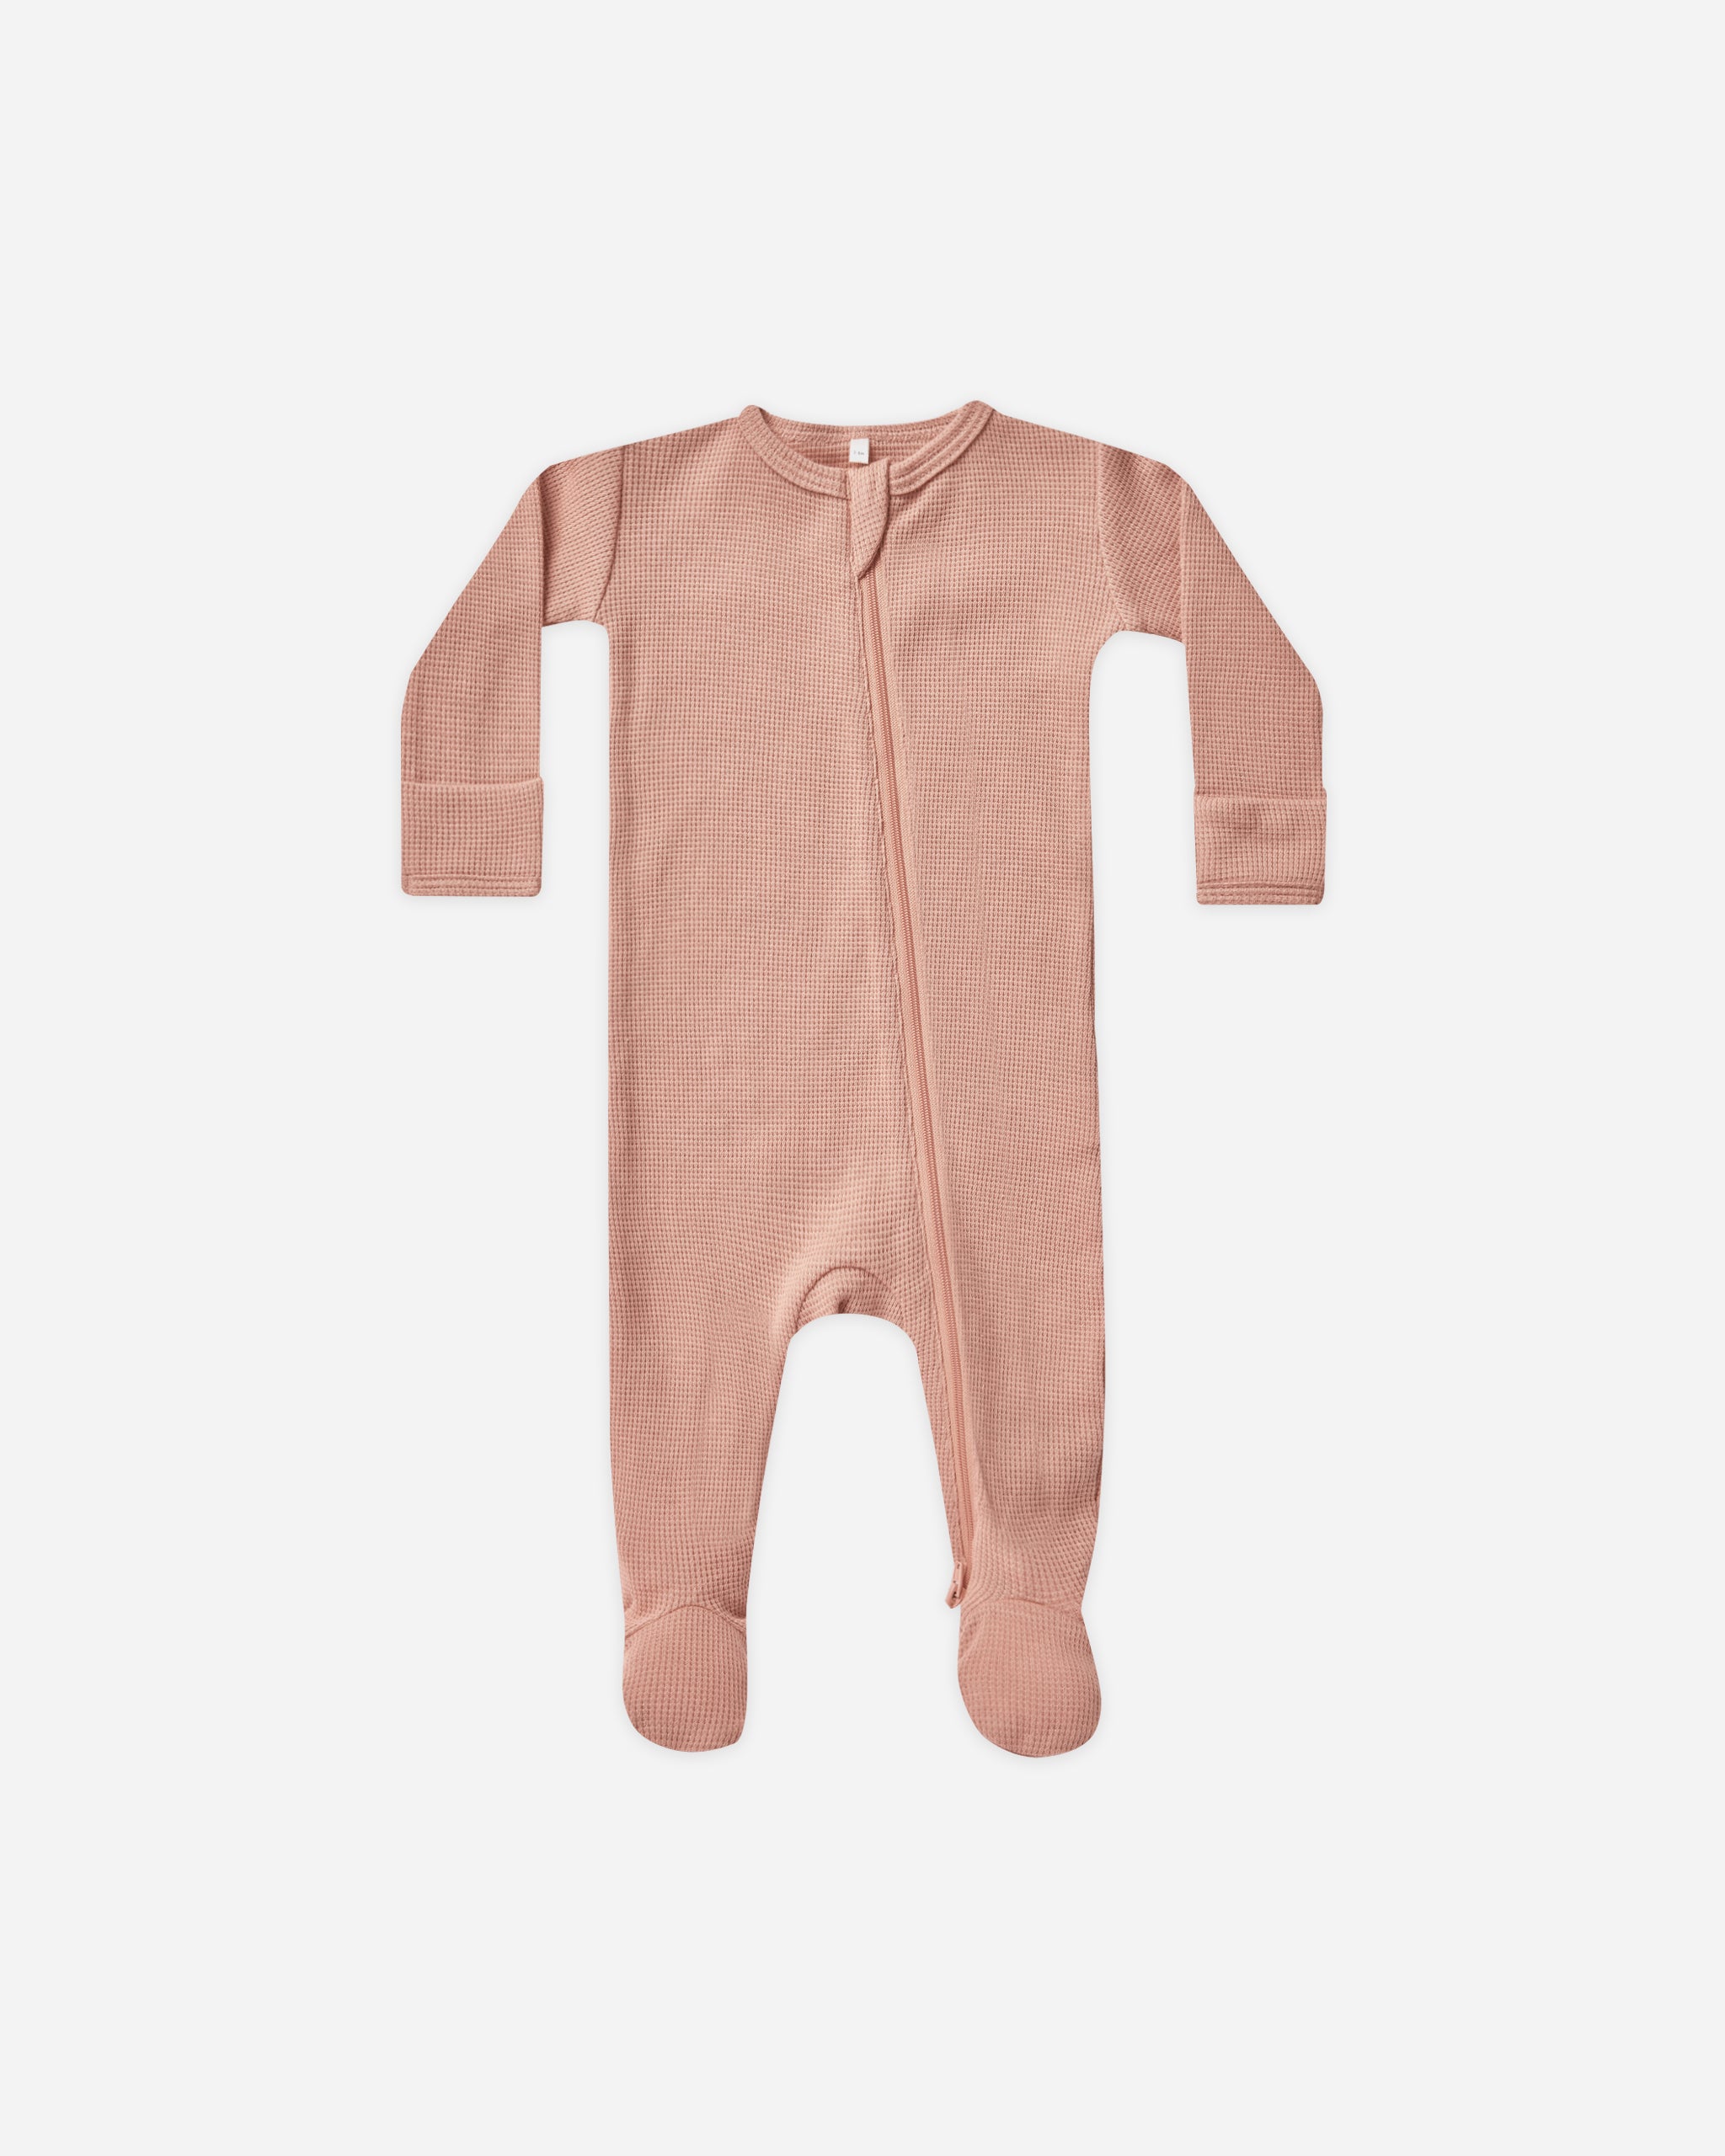 Waffle Zip Footie || Rose - Rylee + Cru | Kids Clothes | Trendy Baby Clothes | Modern Infant Outfits |